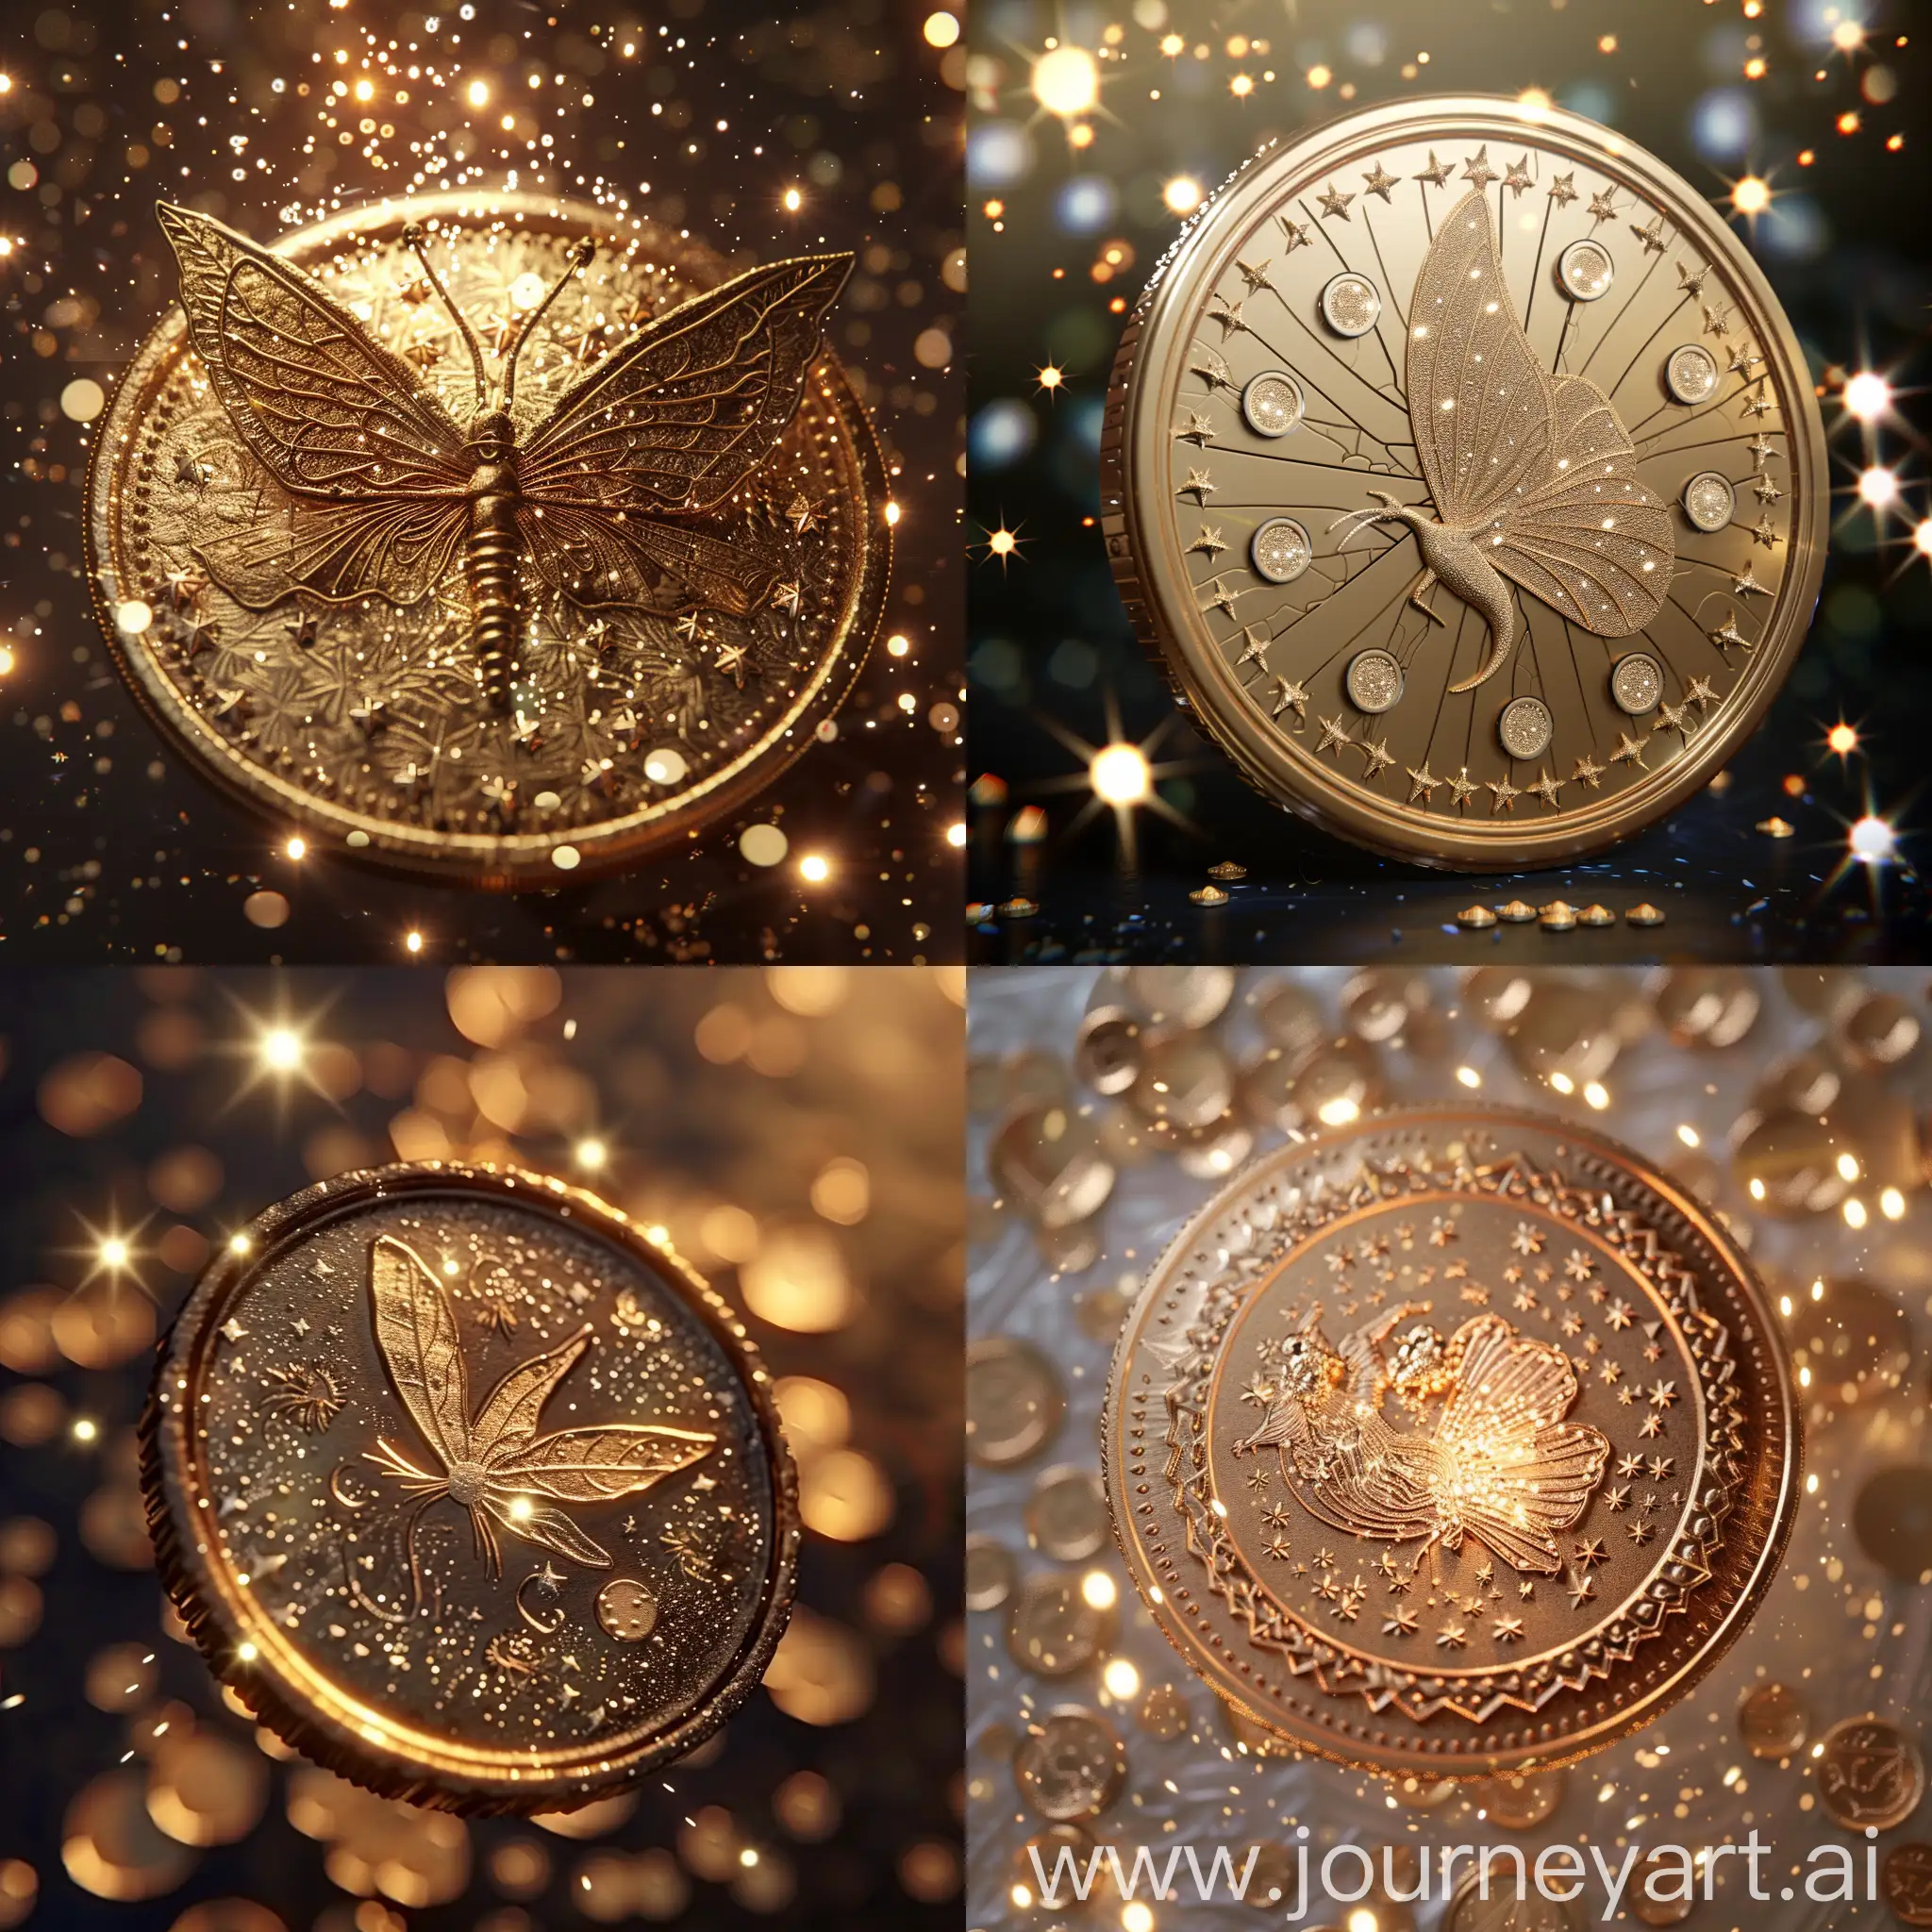 fairy majestic coin with tiny fairy coins, surrounded with sparkles in pixar style 3d